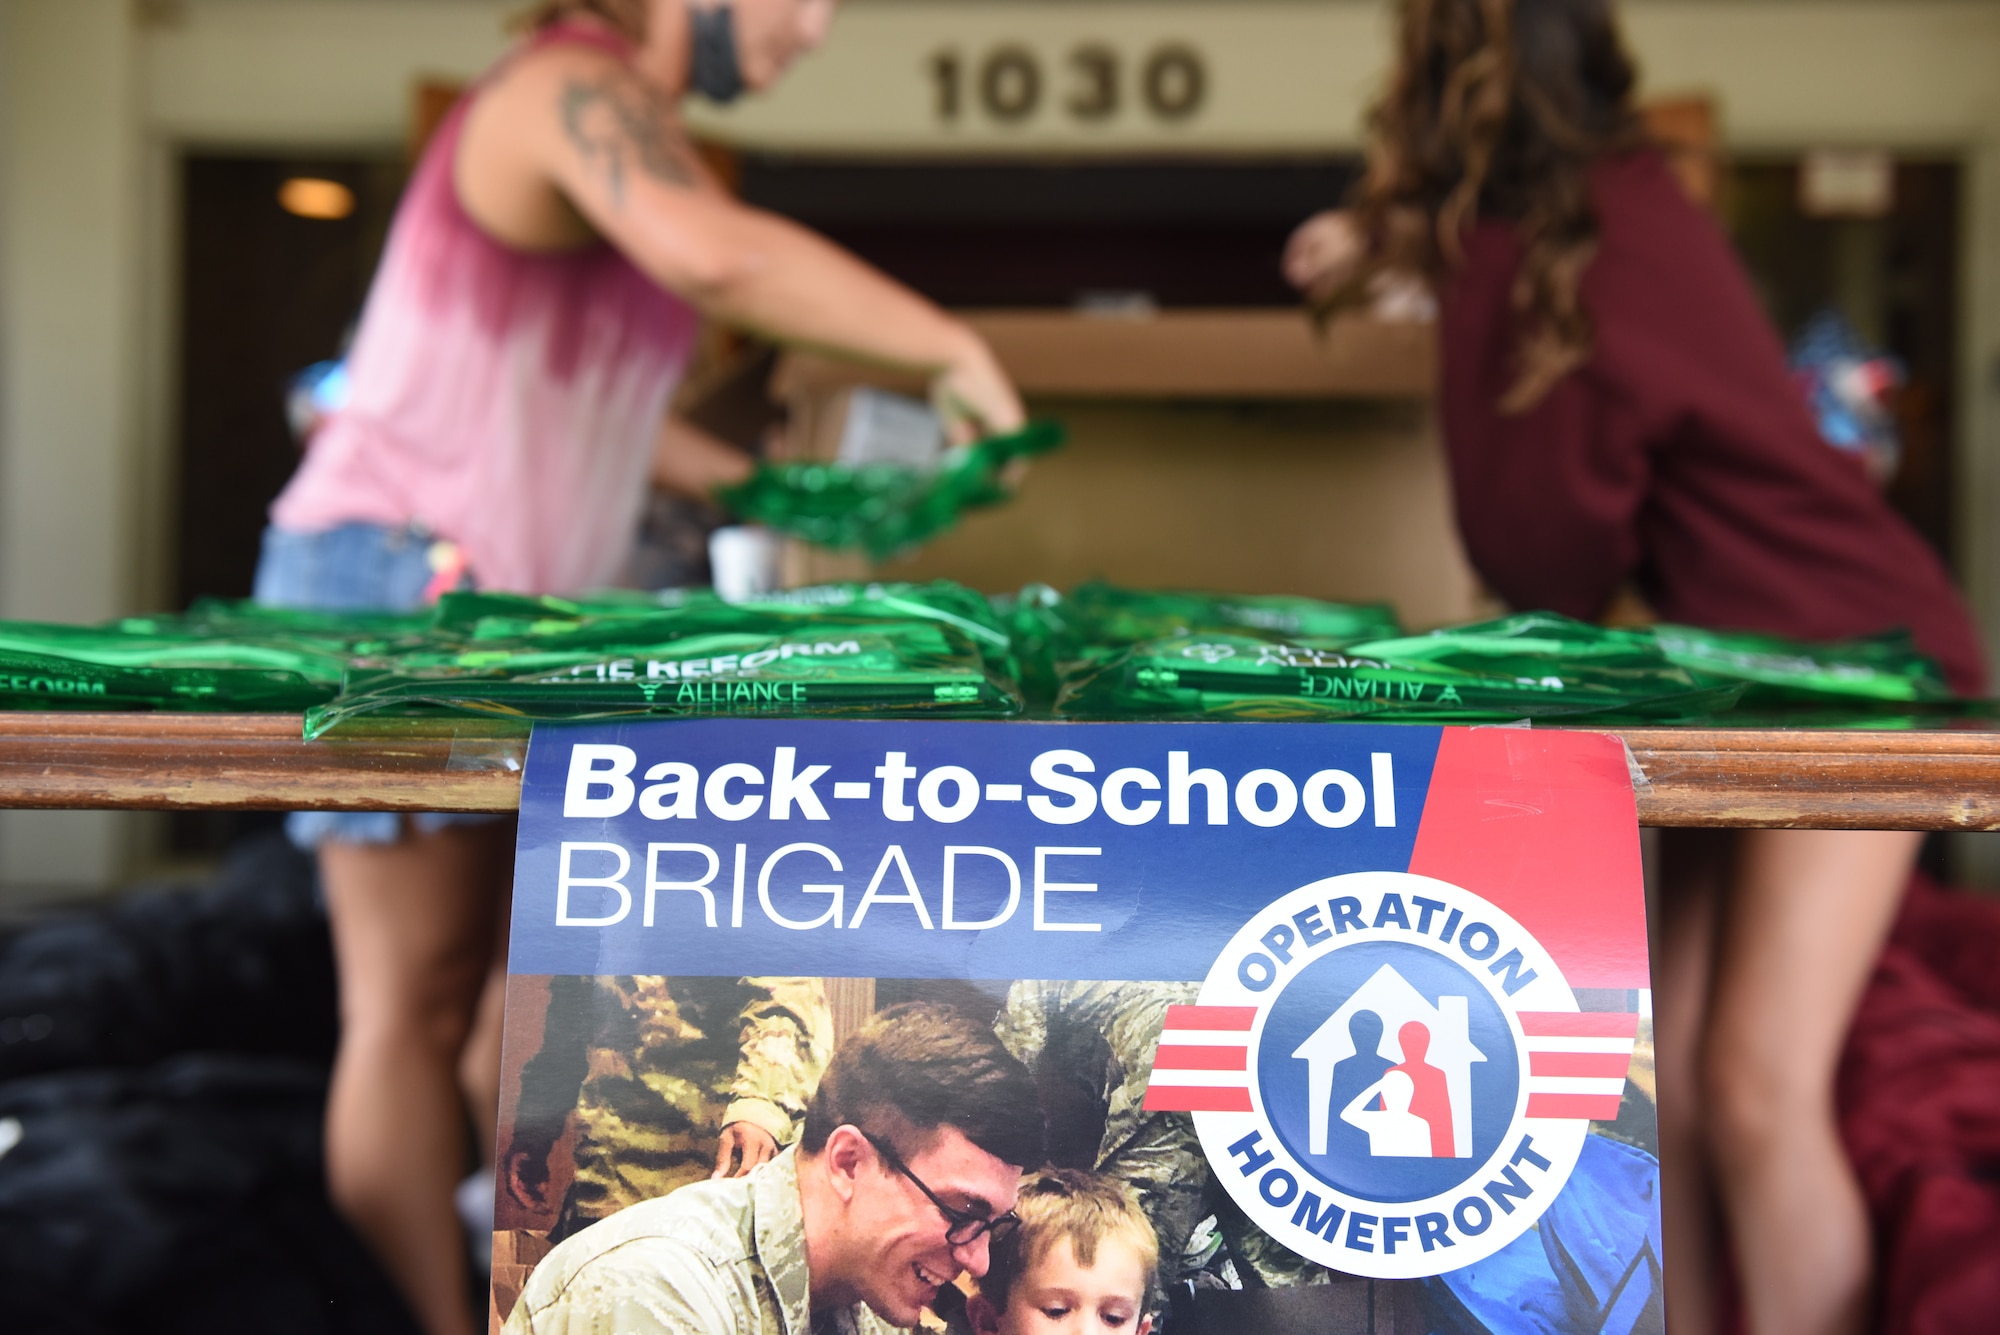 189th Airman and Family Readiness office hosts Back-to-School Brigade